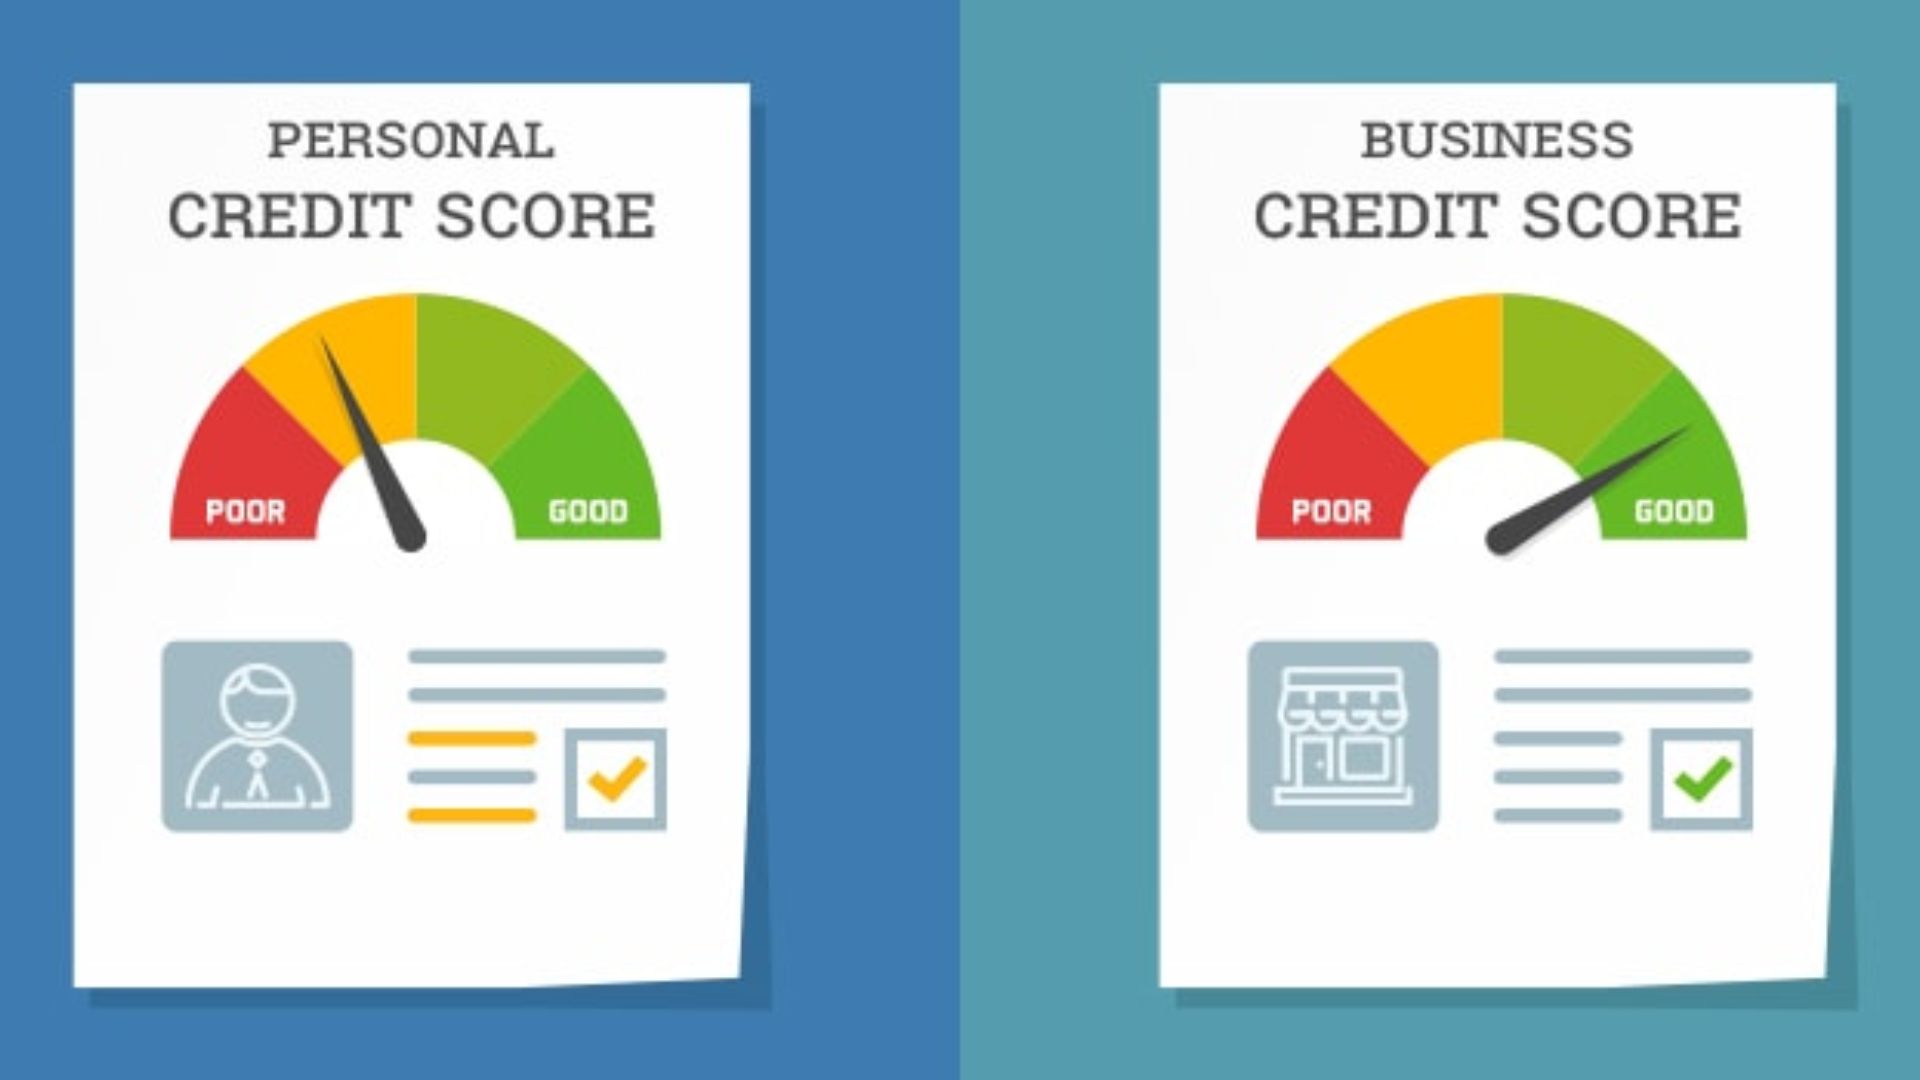 Differences Between Business and Personal Credit Score